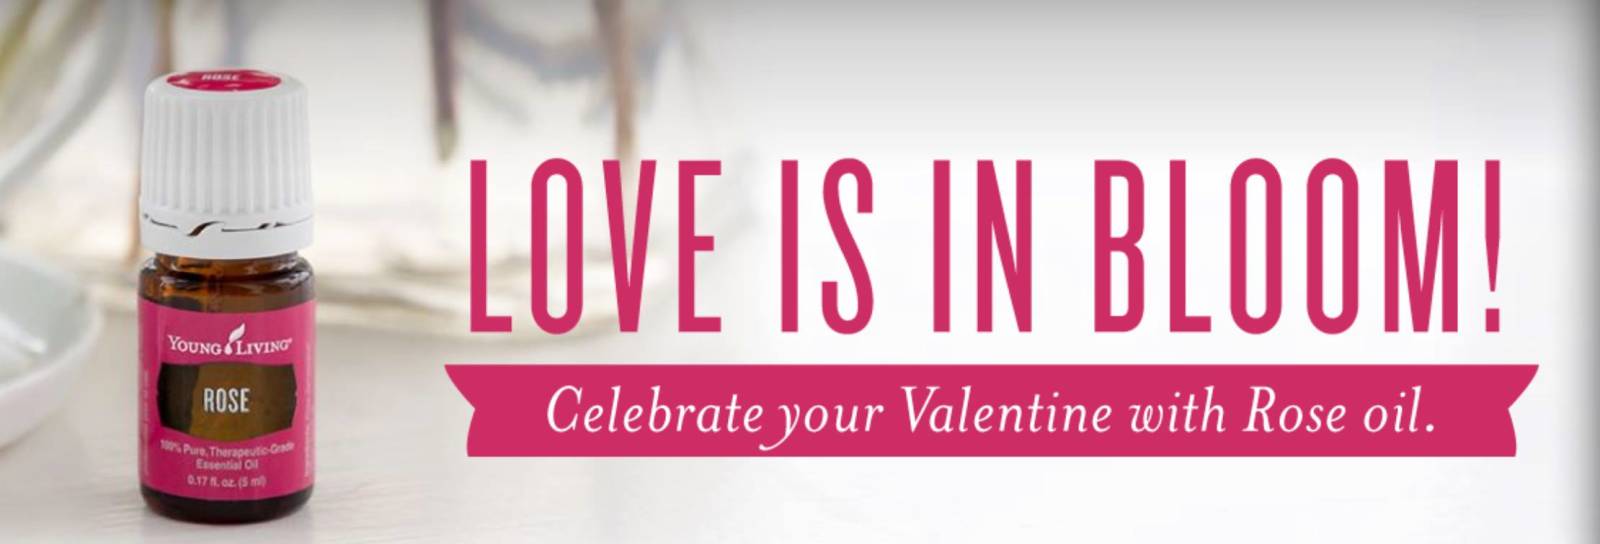 February - Valentine's, New Promotions and New Slique PSK